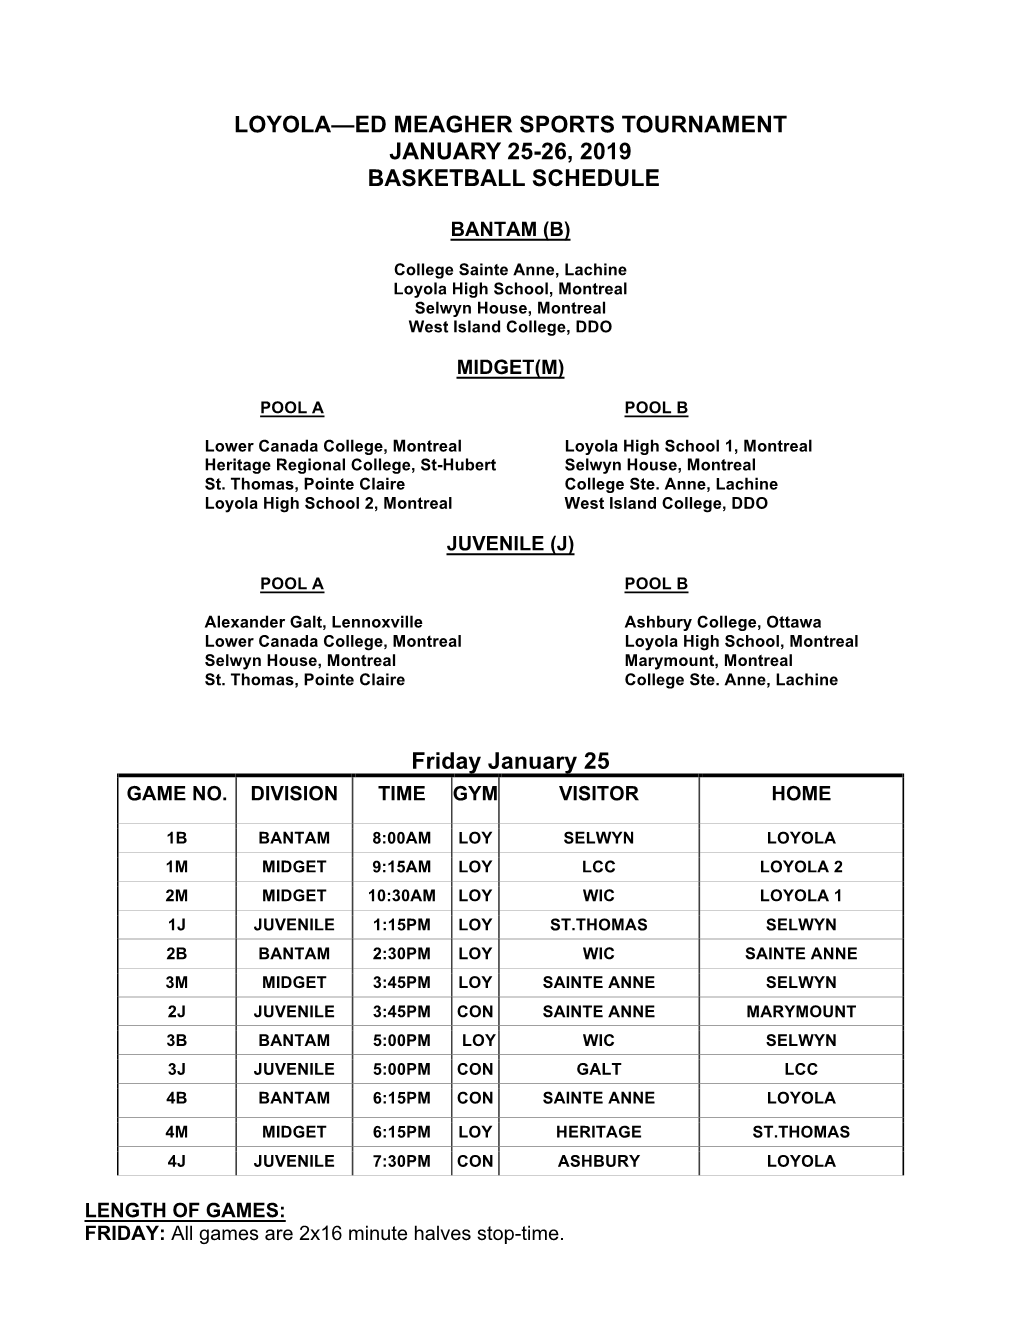 Loyola—Ed Meagher Sports Tournament January 25-26, 2019 Basketball Schedule